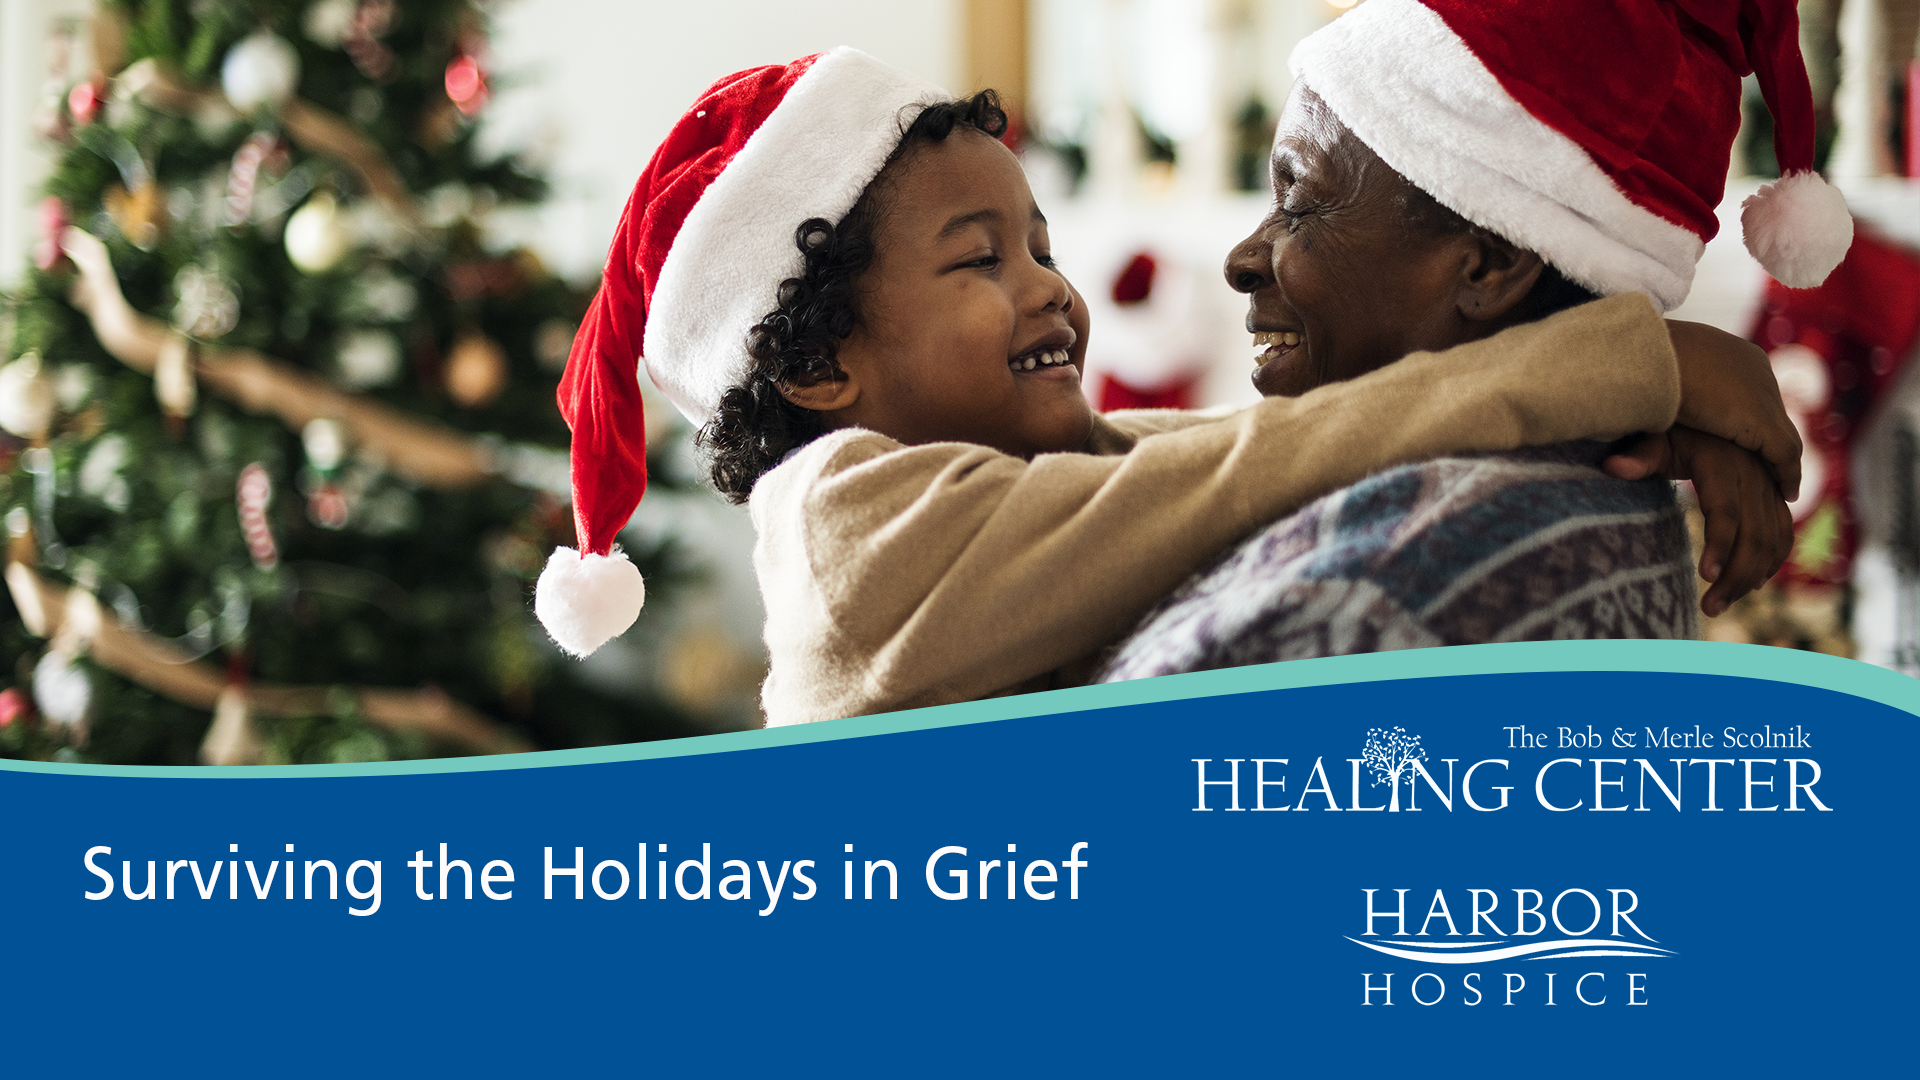 Event Header Surving the Holidays in Grief - Surviving the Holidays in Grief